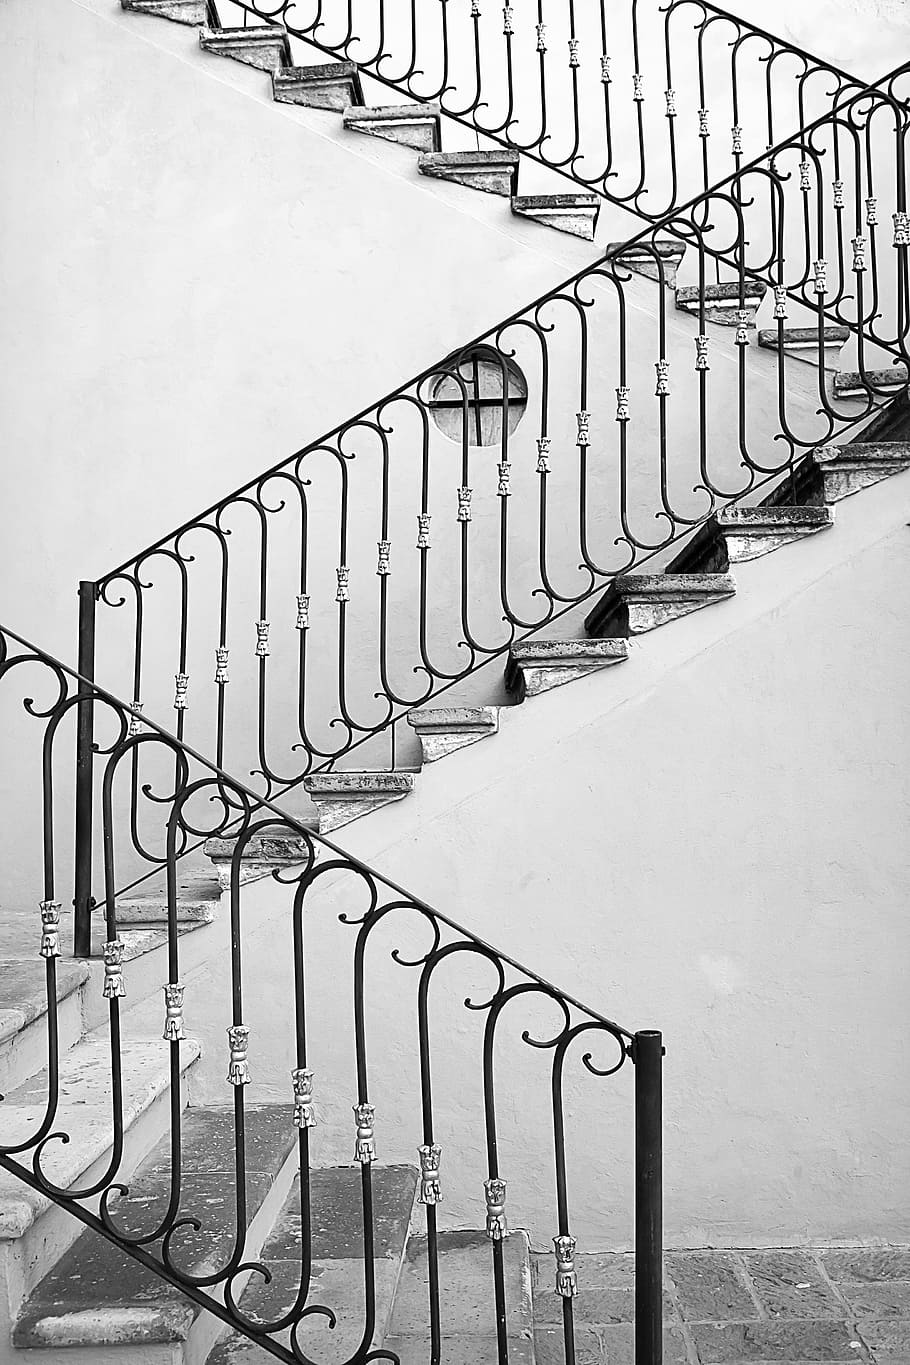 stairs, handrail, architecture, museum, railing, metal, day, staircase, safety, security